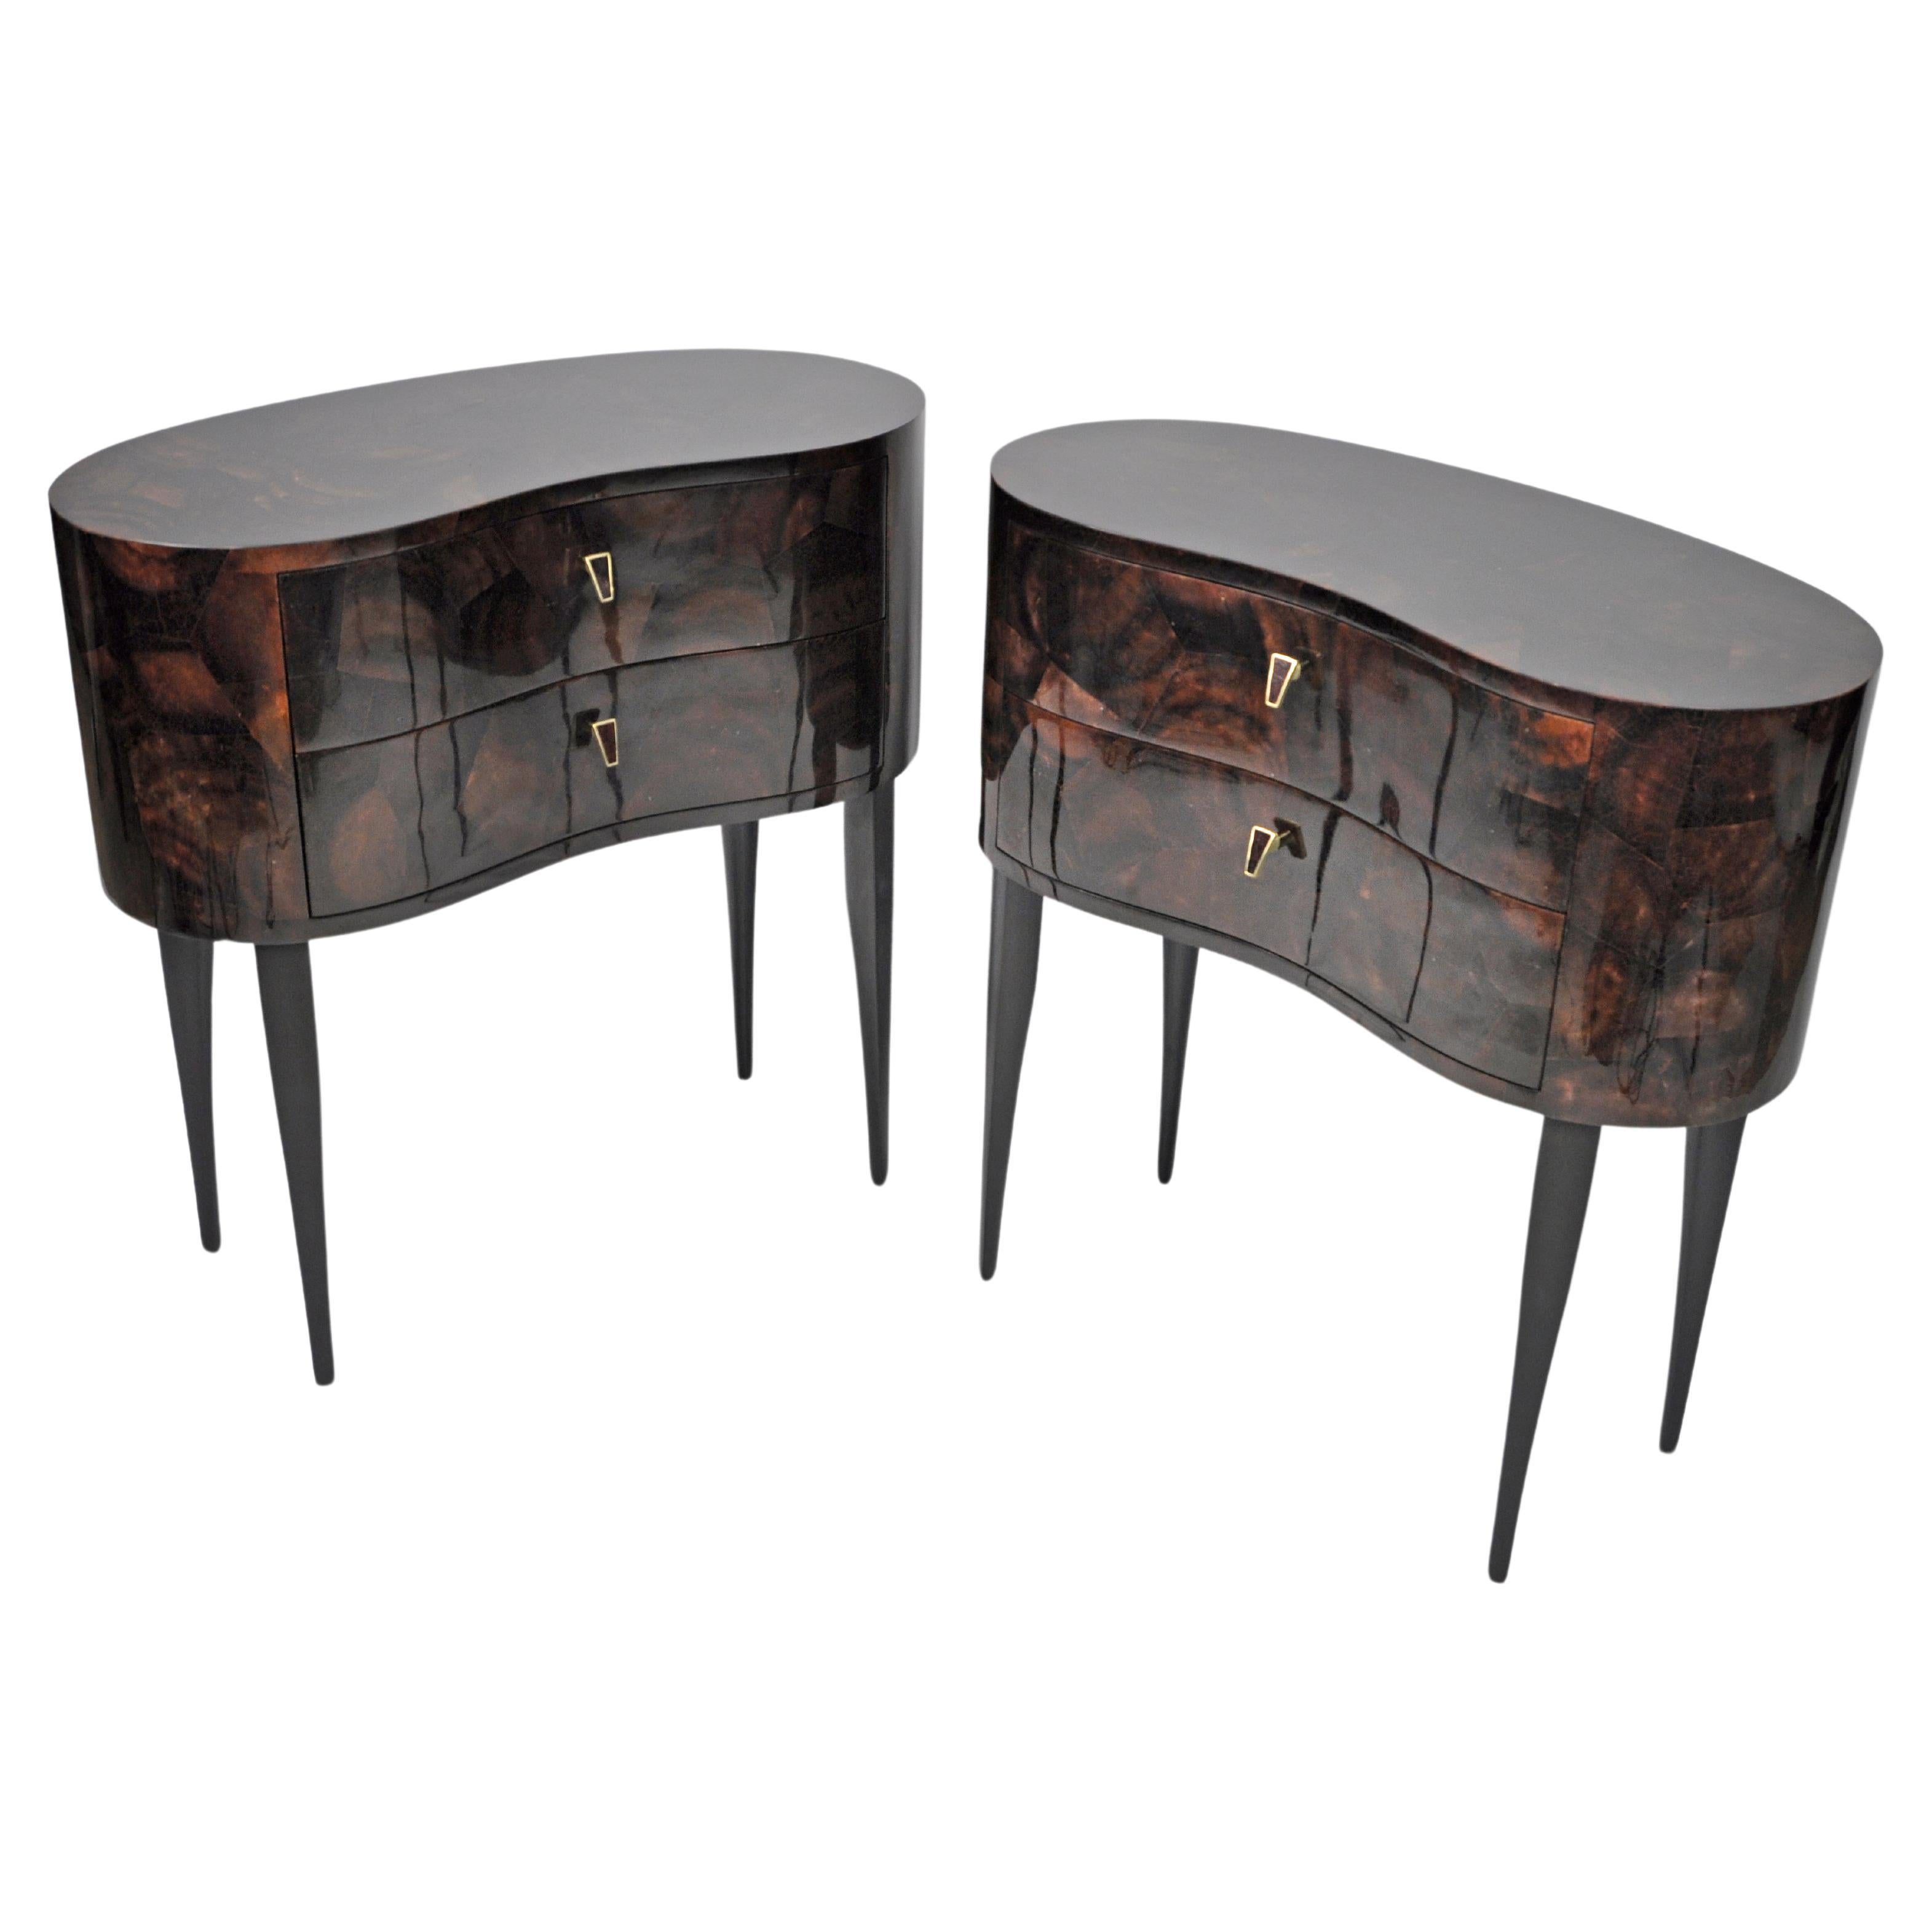 Pair of bedside tables in Brown marquetry by Ginger Brown